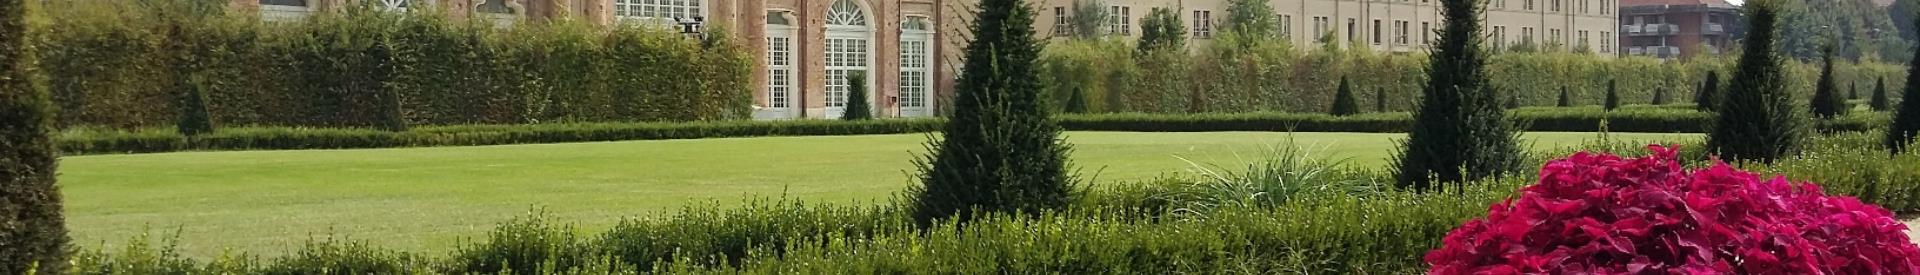 The grounds and all the beauty of the Palace of Venaria are waiting for you.